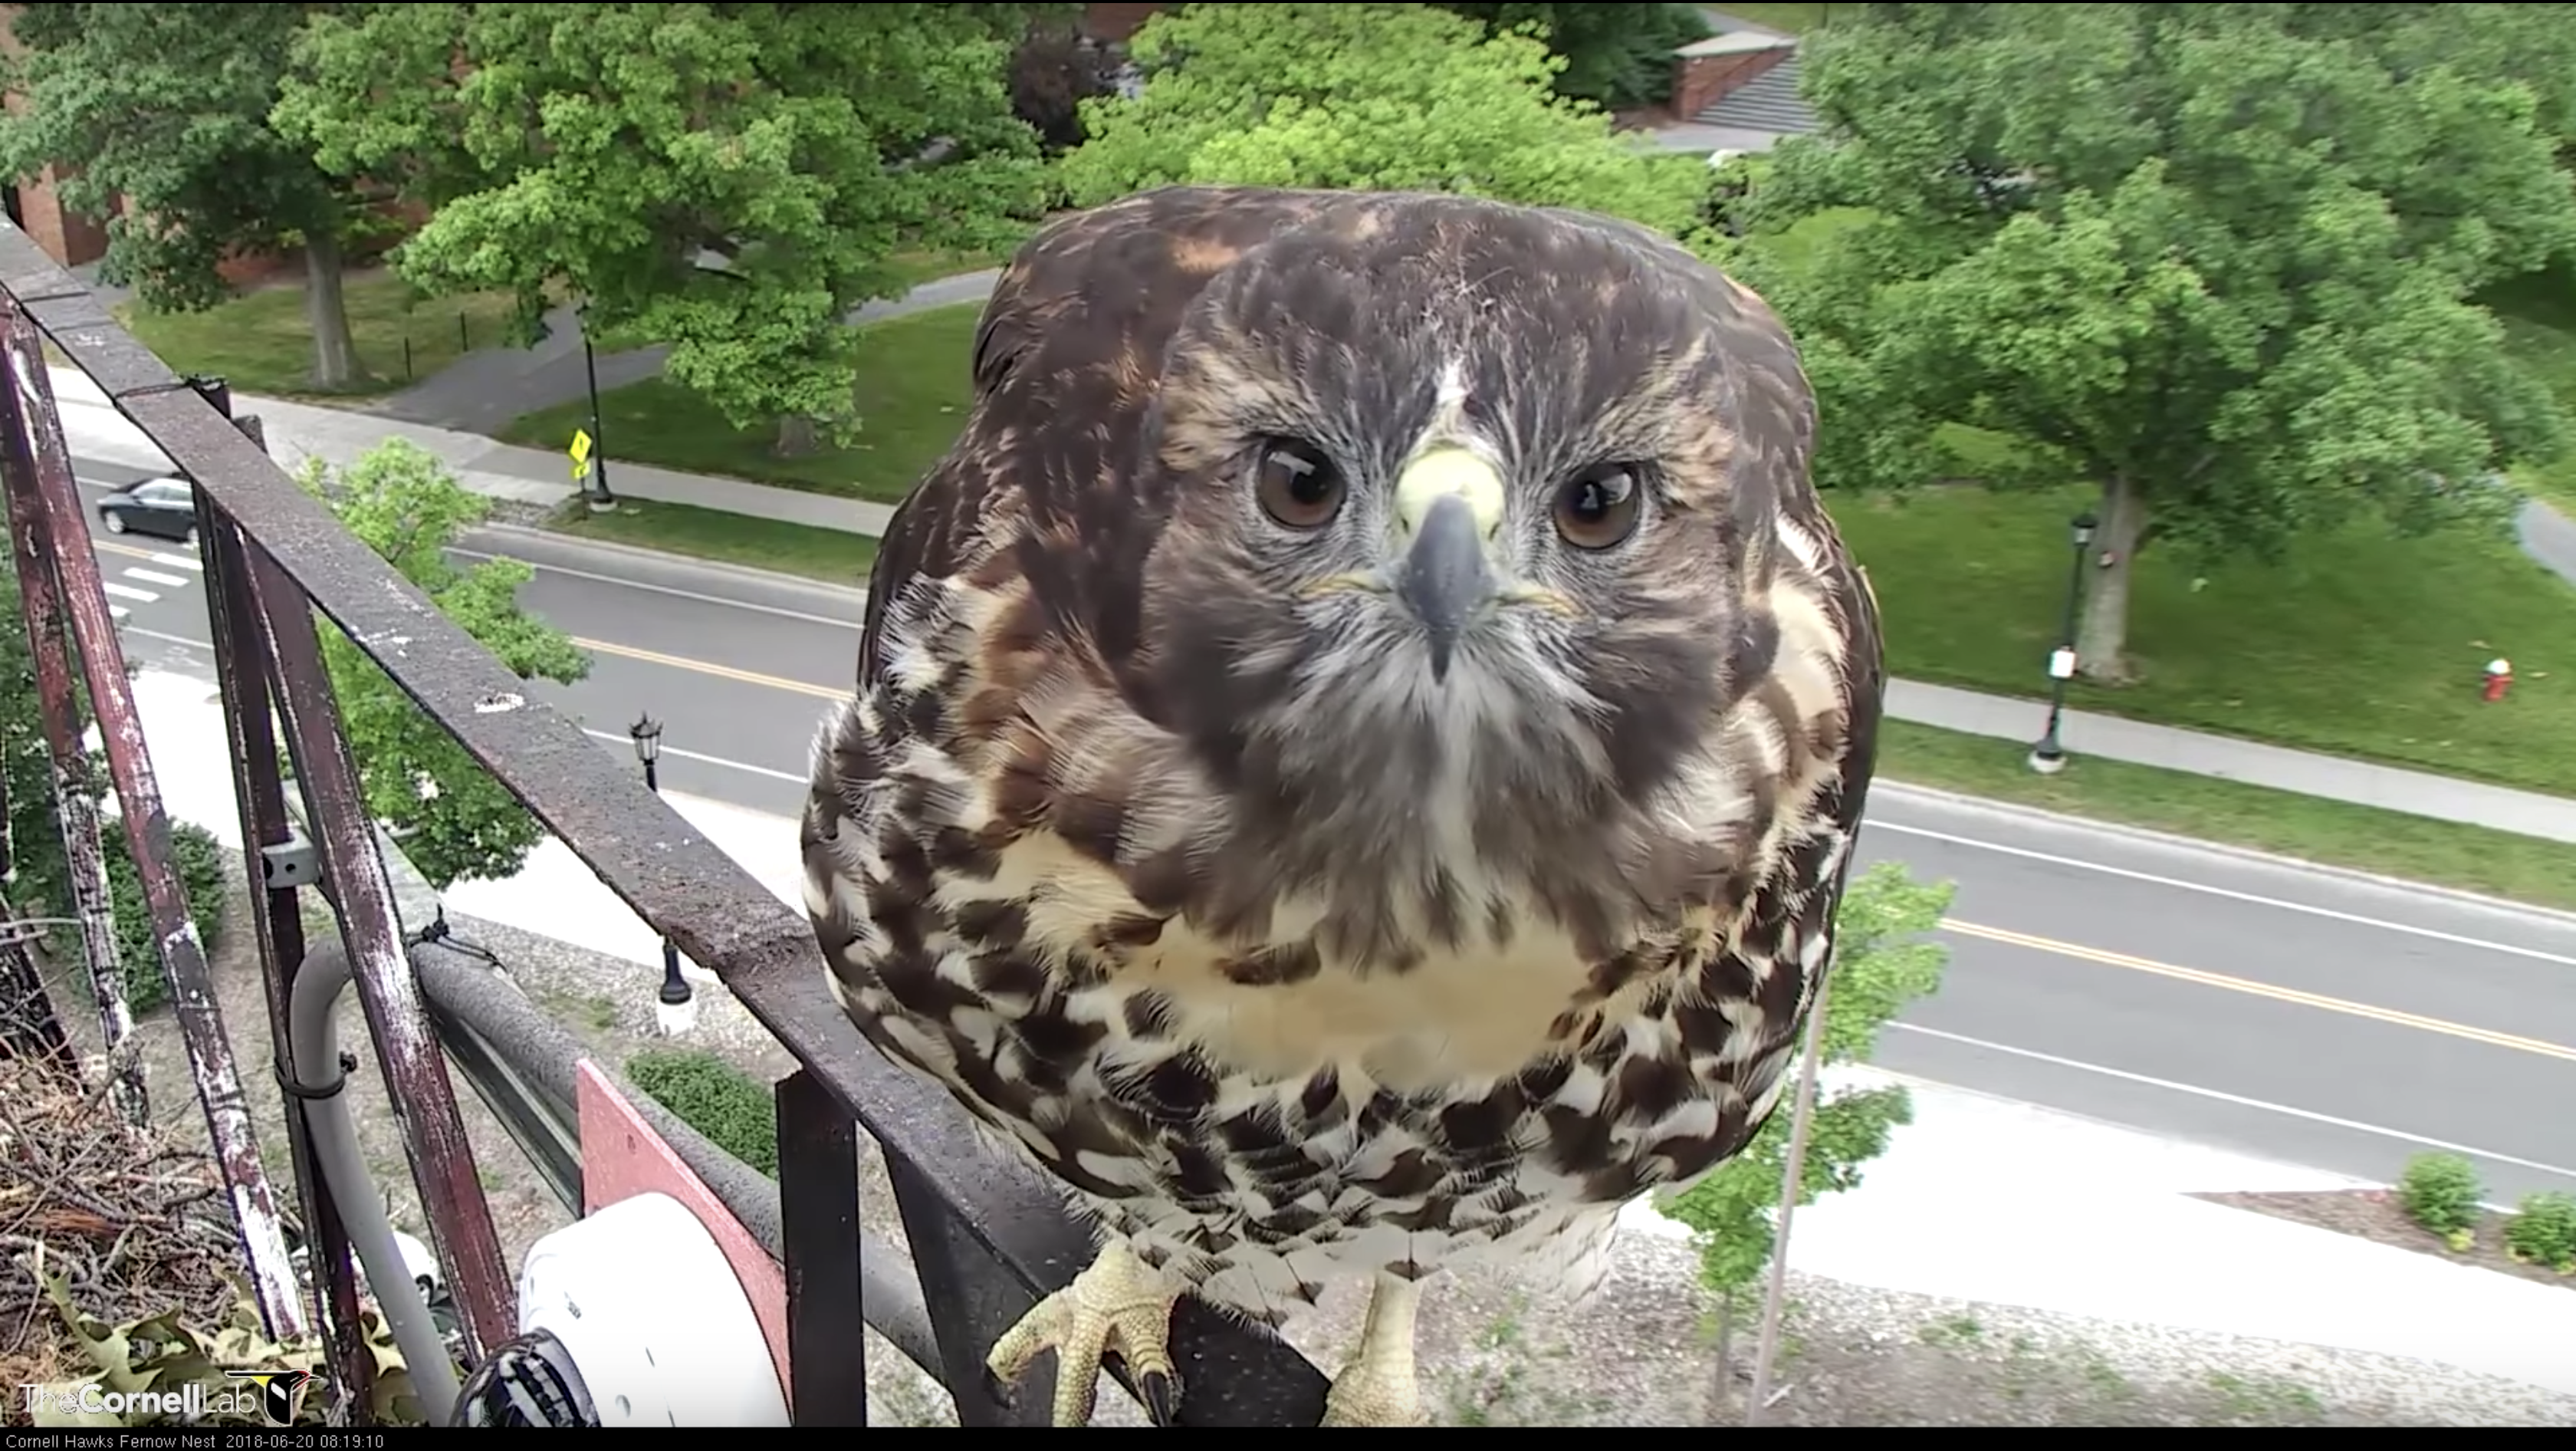 A red-tailed hawk fledgling looking at the cam and perched on the railing seen on the Red-tailed Hawk cam.